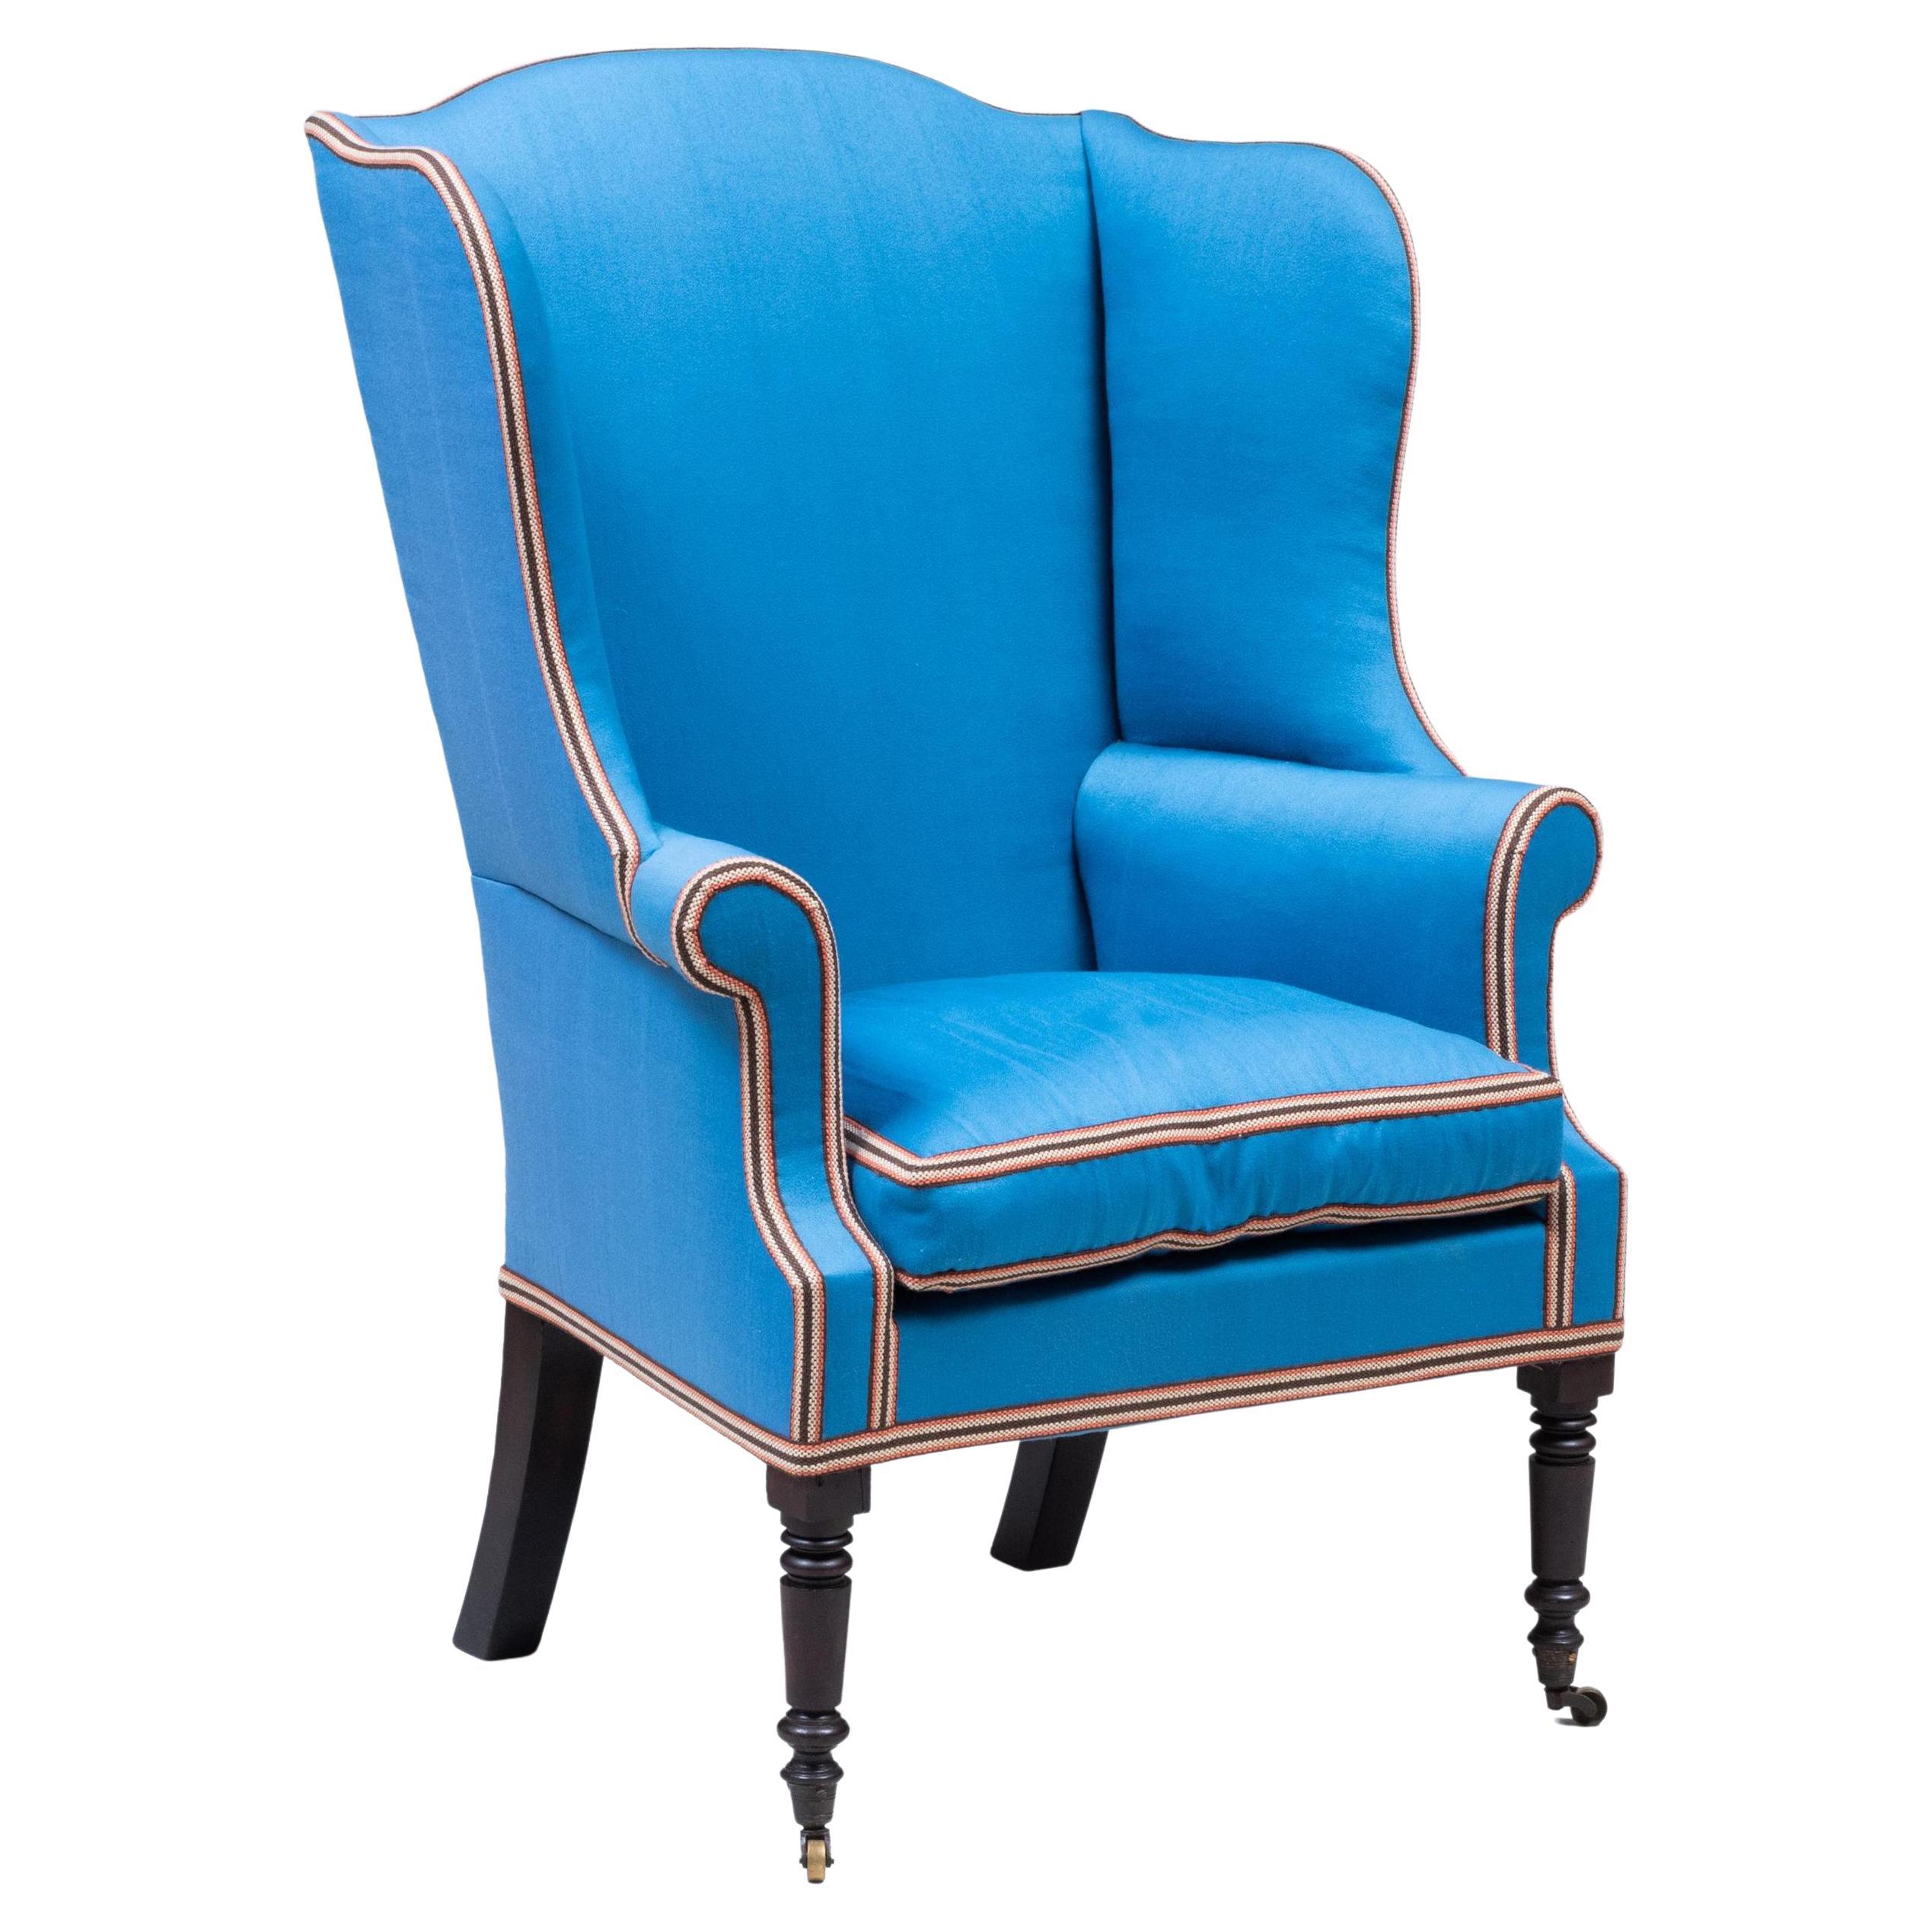 American Federal Wingback Chair with Blue Upholstery For Sale